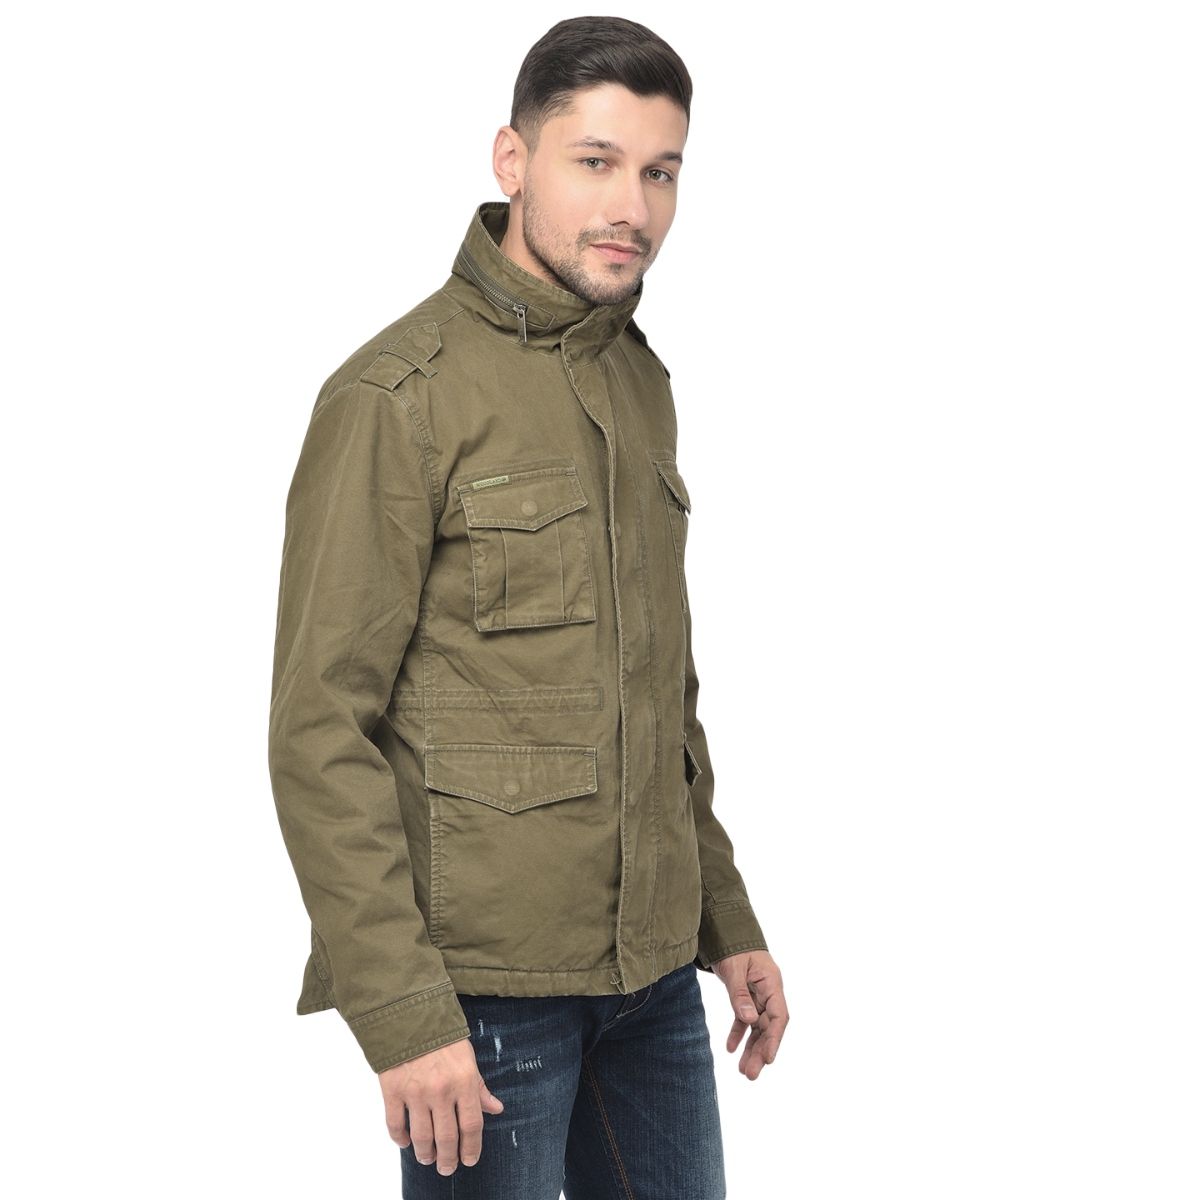 Buy Woodland Mens Polyster Casual Regular Jacket (Grey, S) at Amazon.in